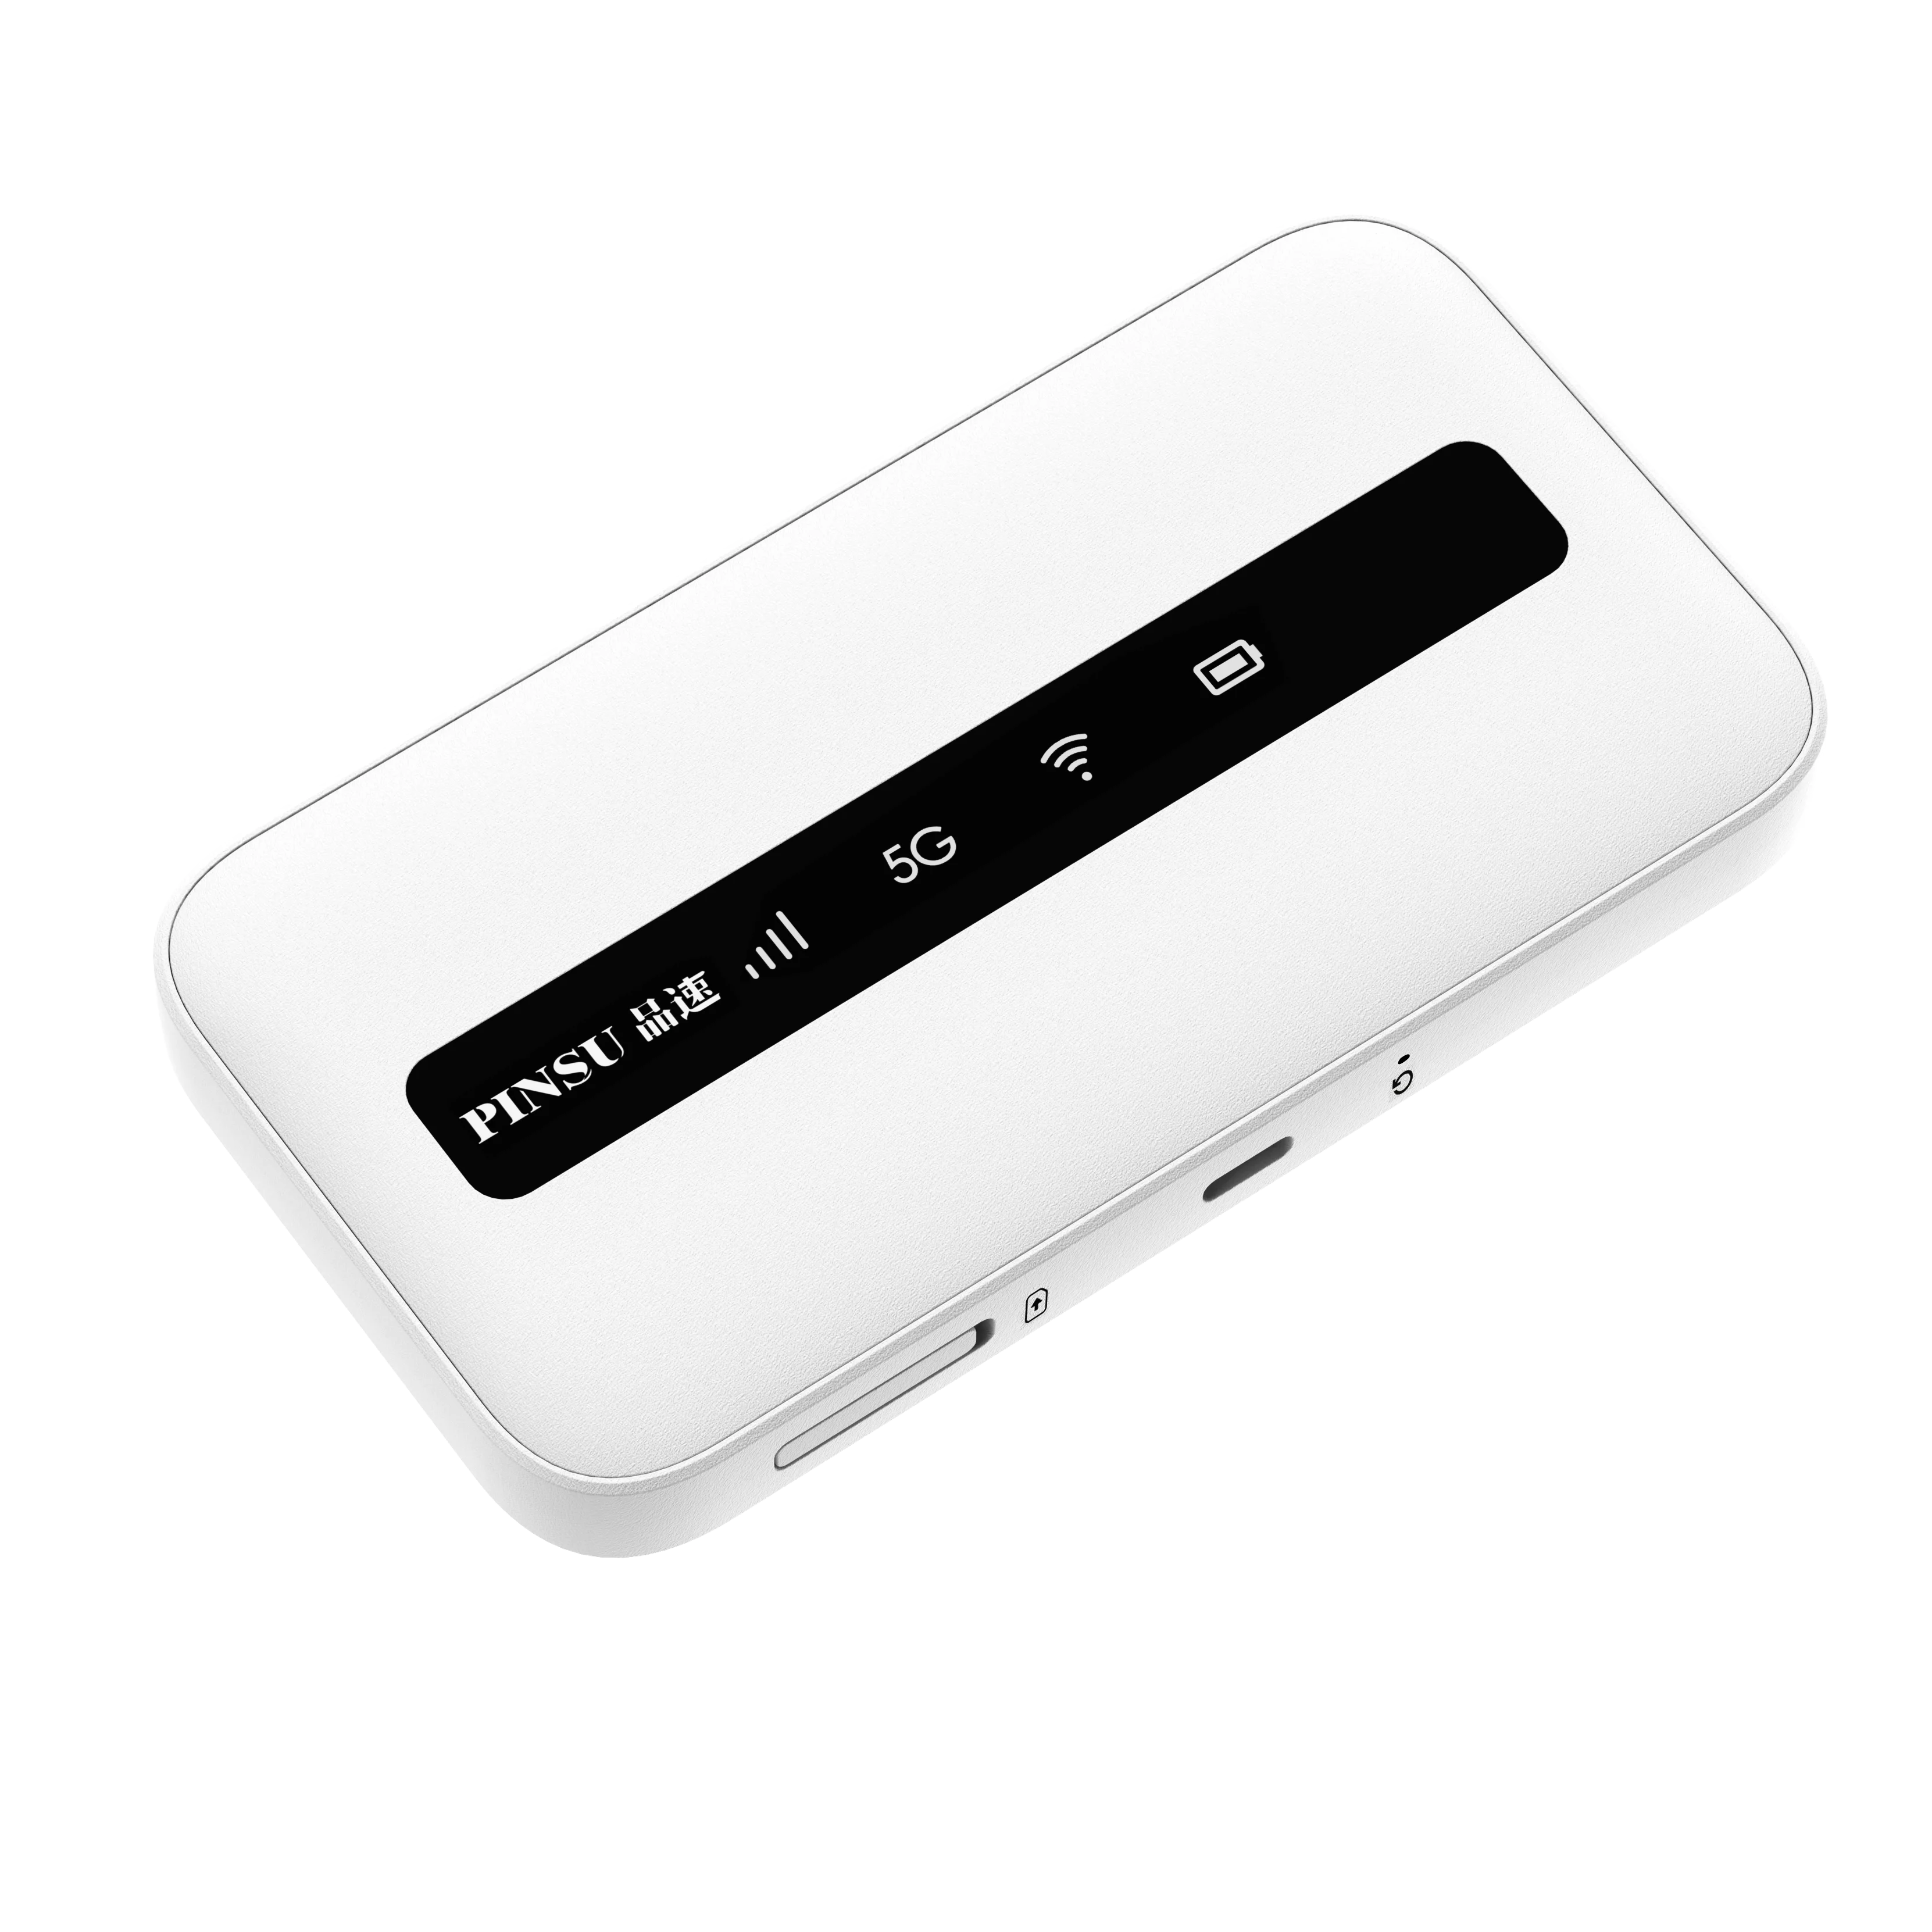 Pocket 5G WiFi, Mini Smart 5G WiFi Router with SIM Card Slot, 300Mbps, Up  to 10 WiFi Users, Plug and Play, Portable USB 5G Router for Cell Phones